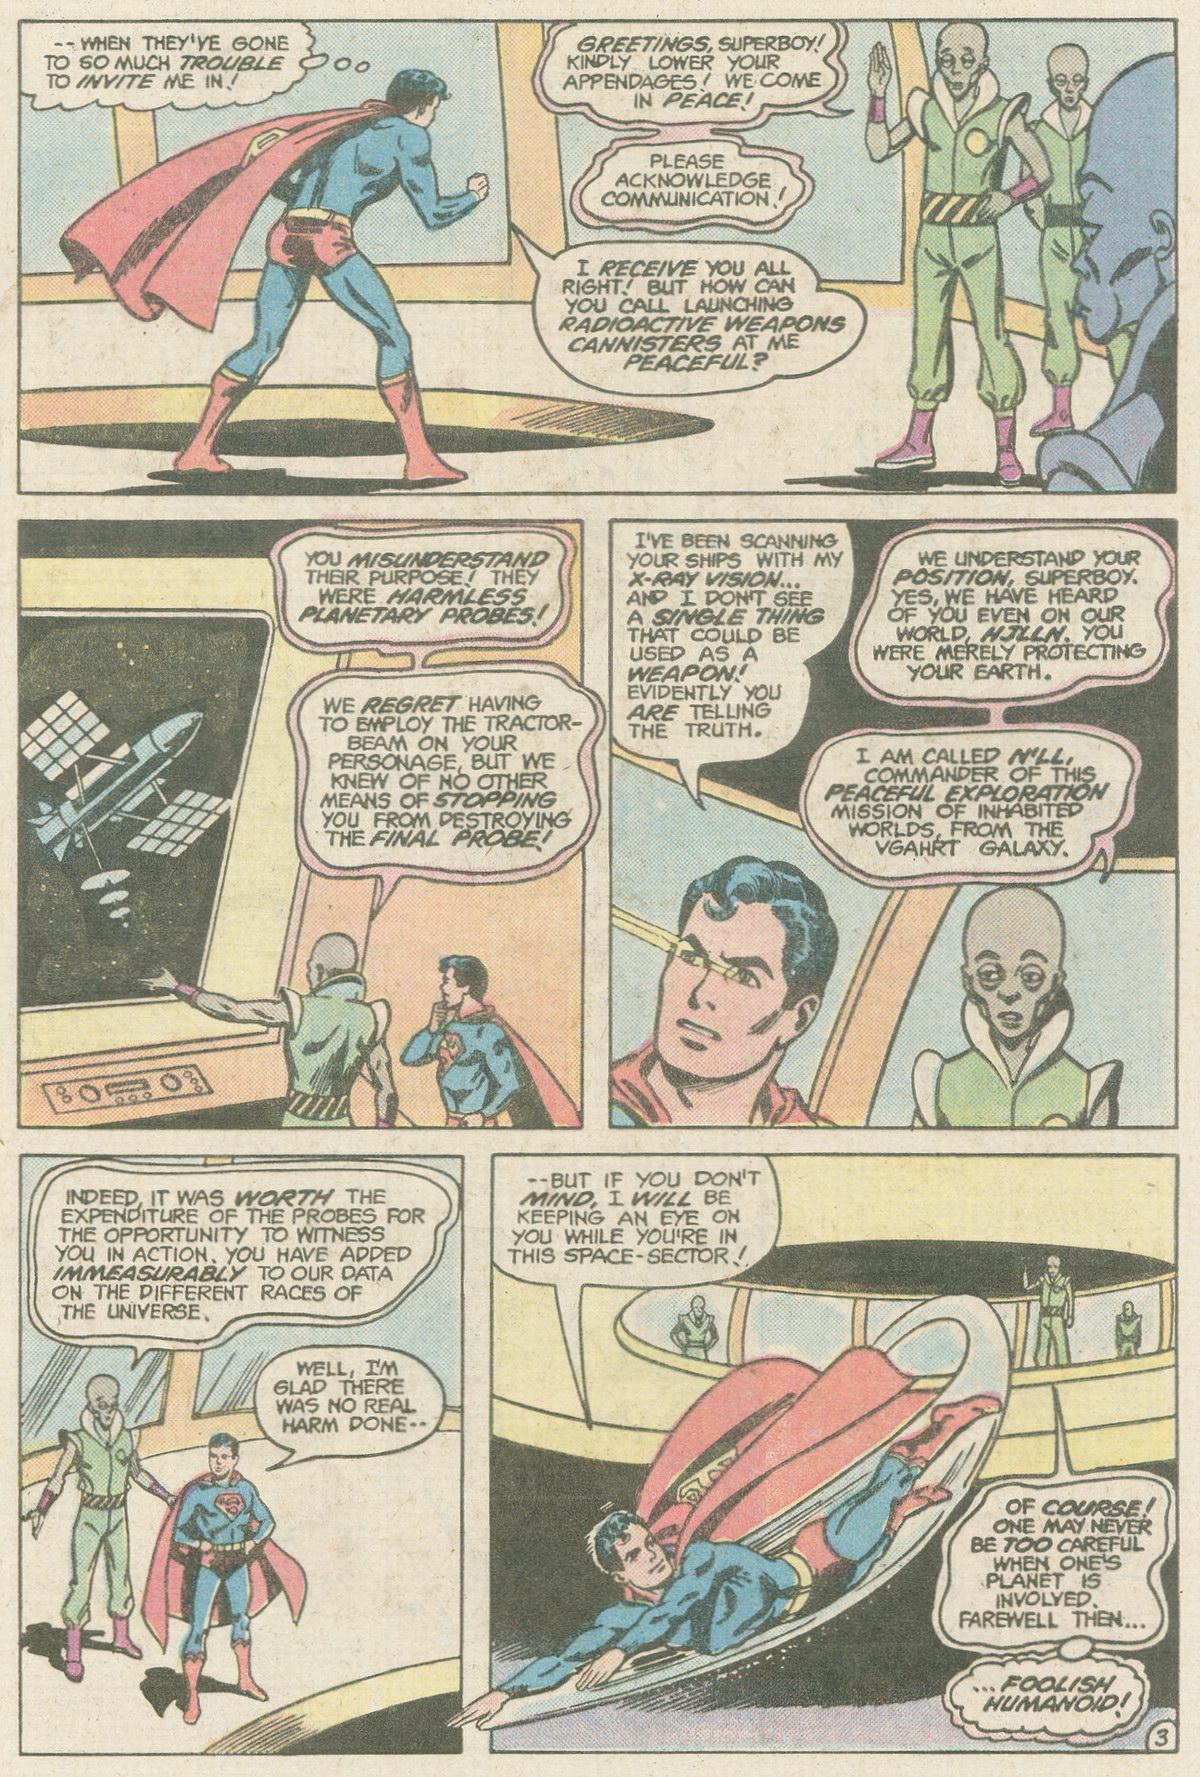 The New Adventures of Superboy 40 Page 3